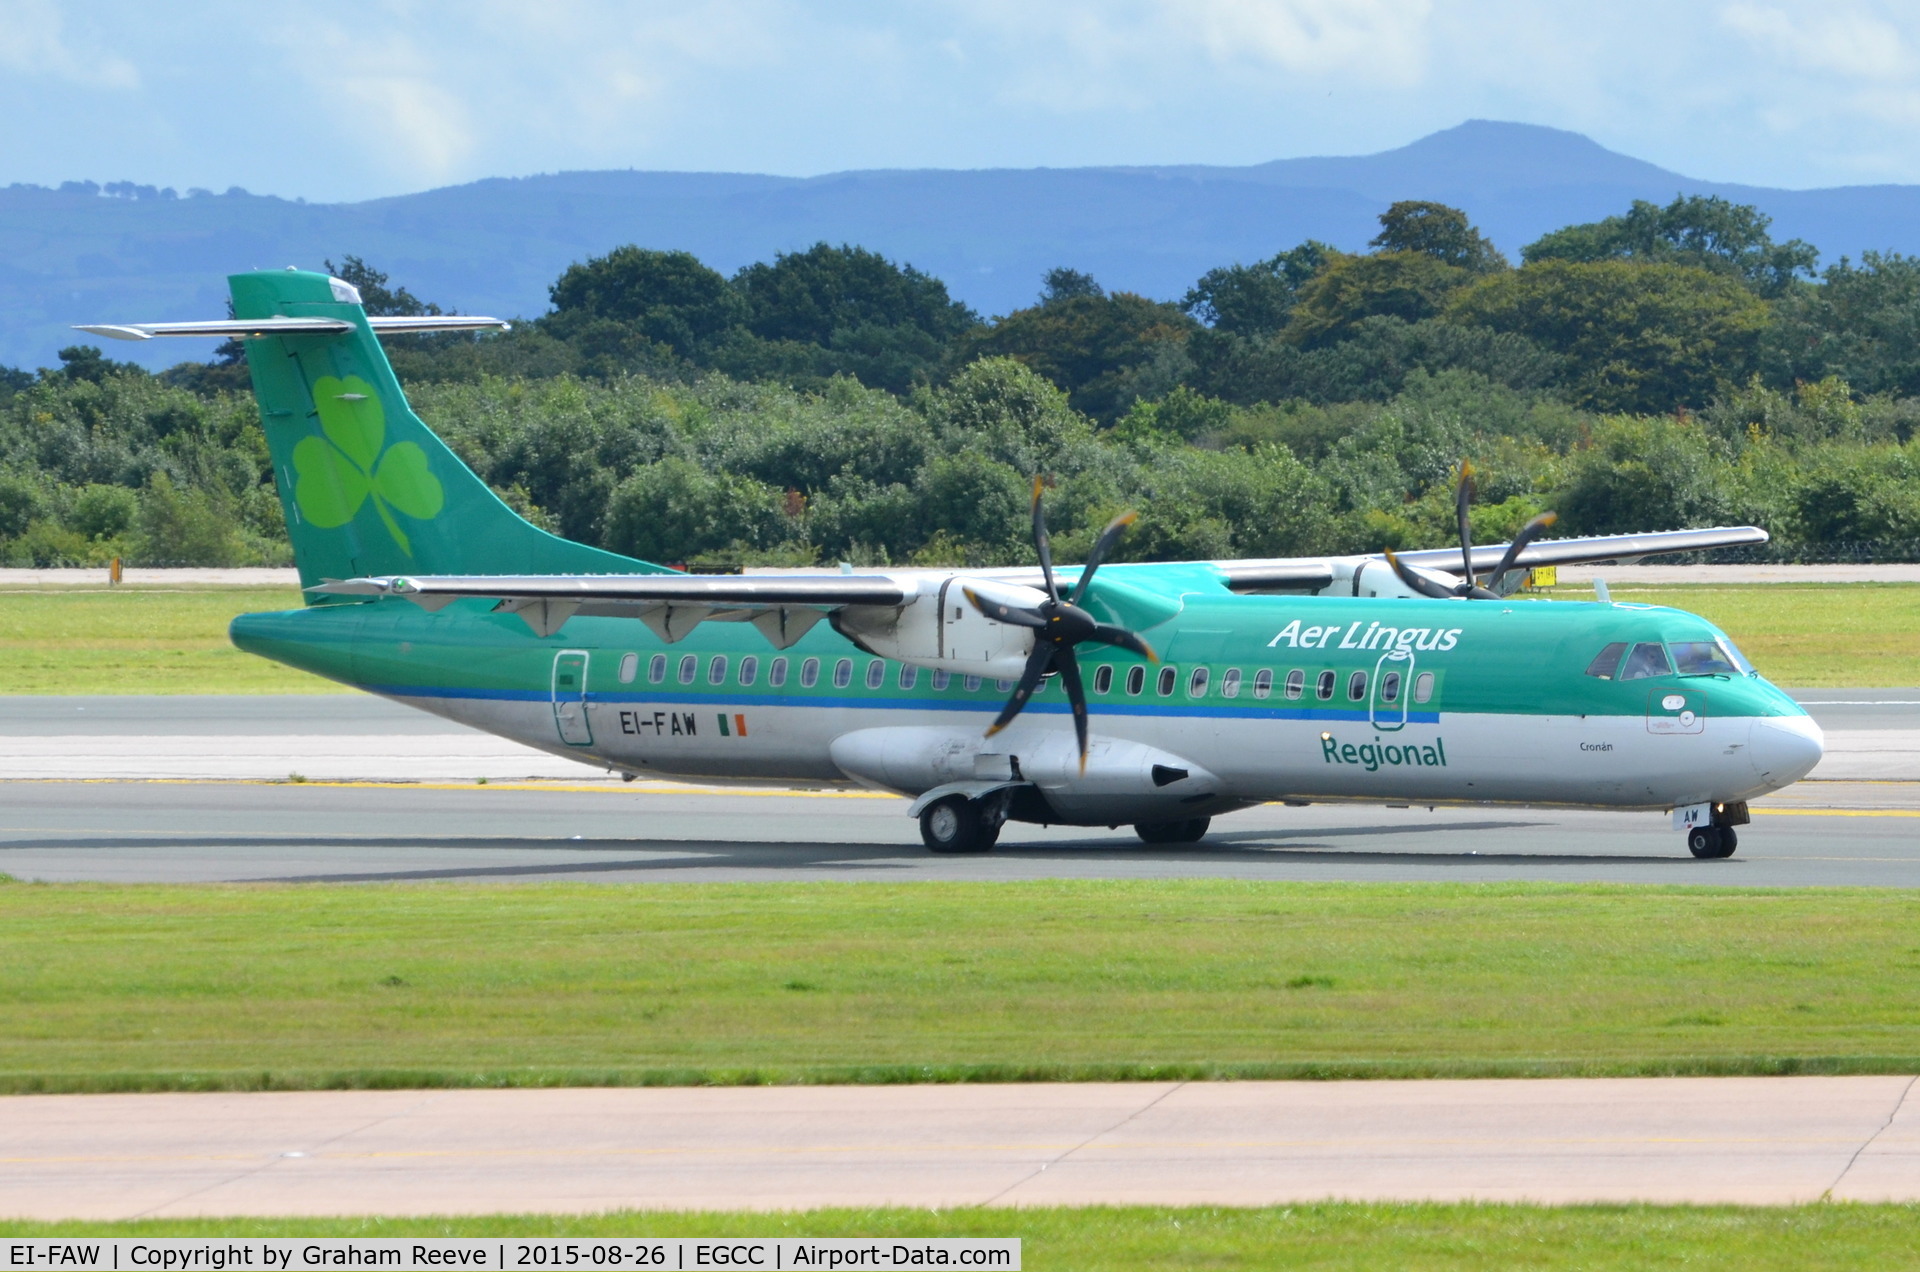 EI-FAW, 2013 ATR 72-600 (72-212A) C/N 1122, Just landed at Manchester.